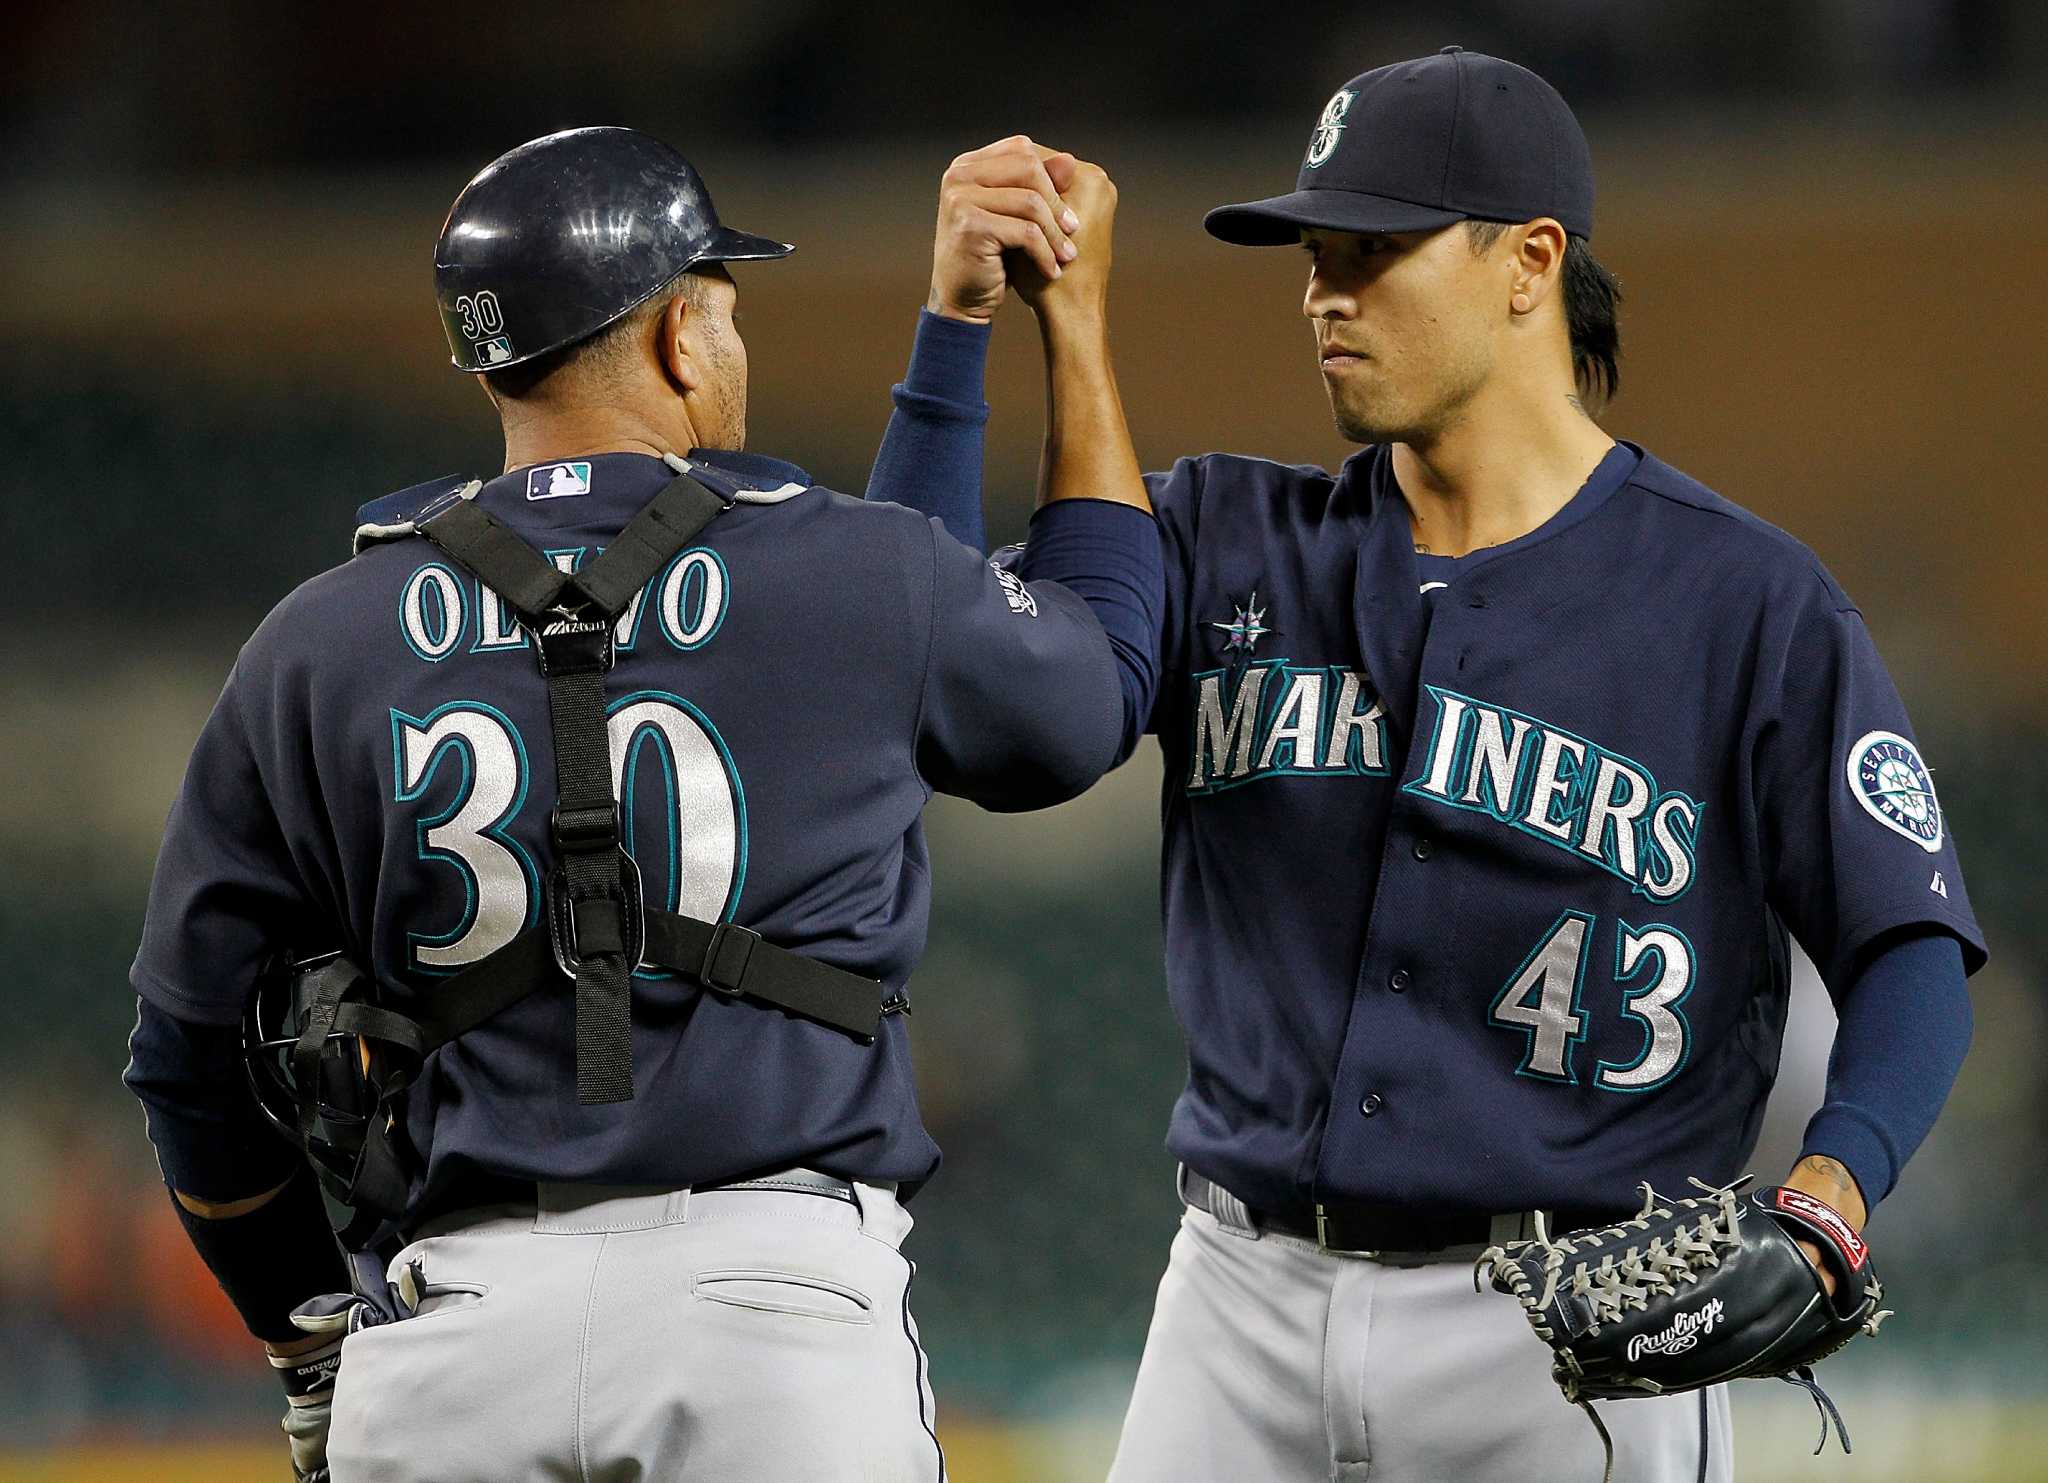 Seattle Mariners new uniform: Alternate has gold accents - Sports